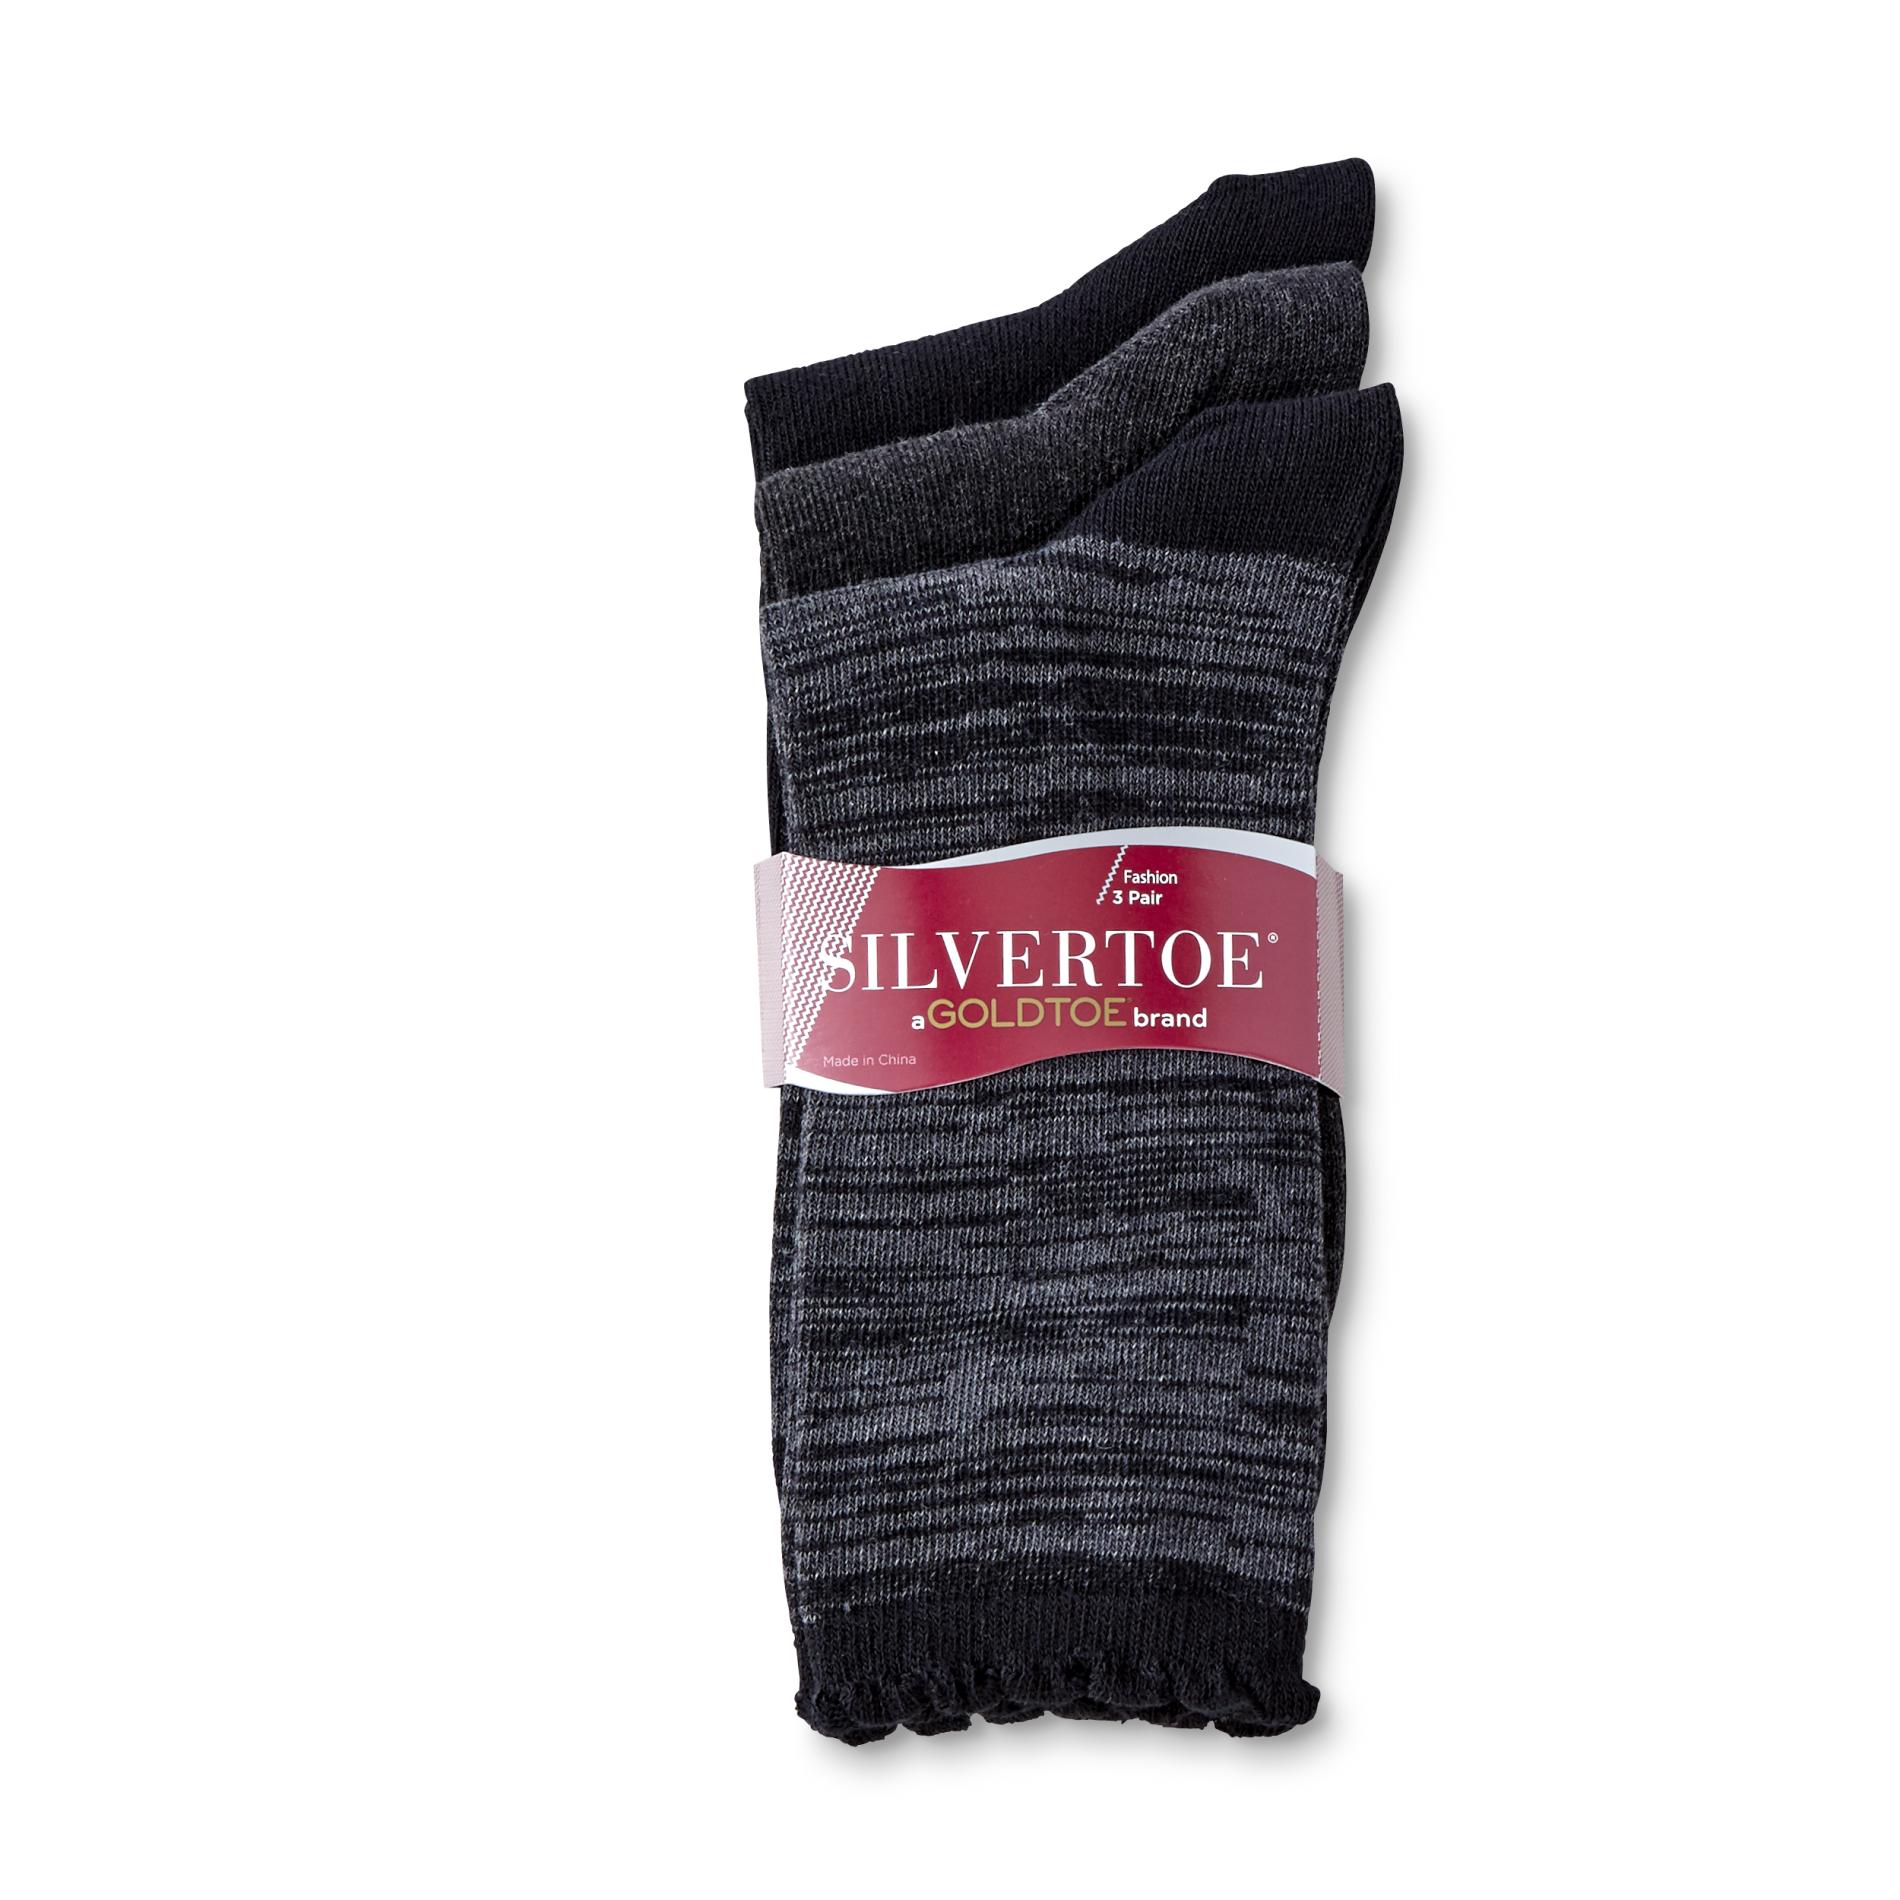 Silvertoe Women's 3-Pairs Fashion Crew Socks - Space Dyed & Solid